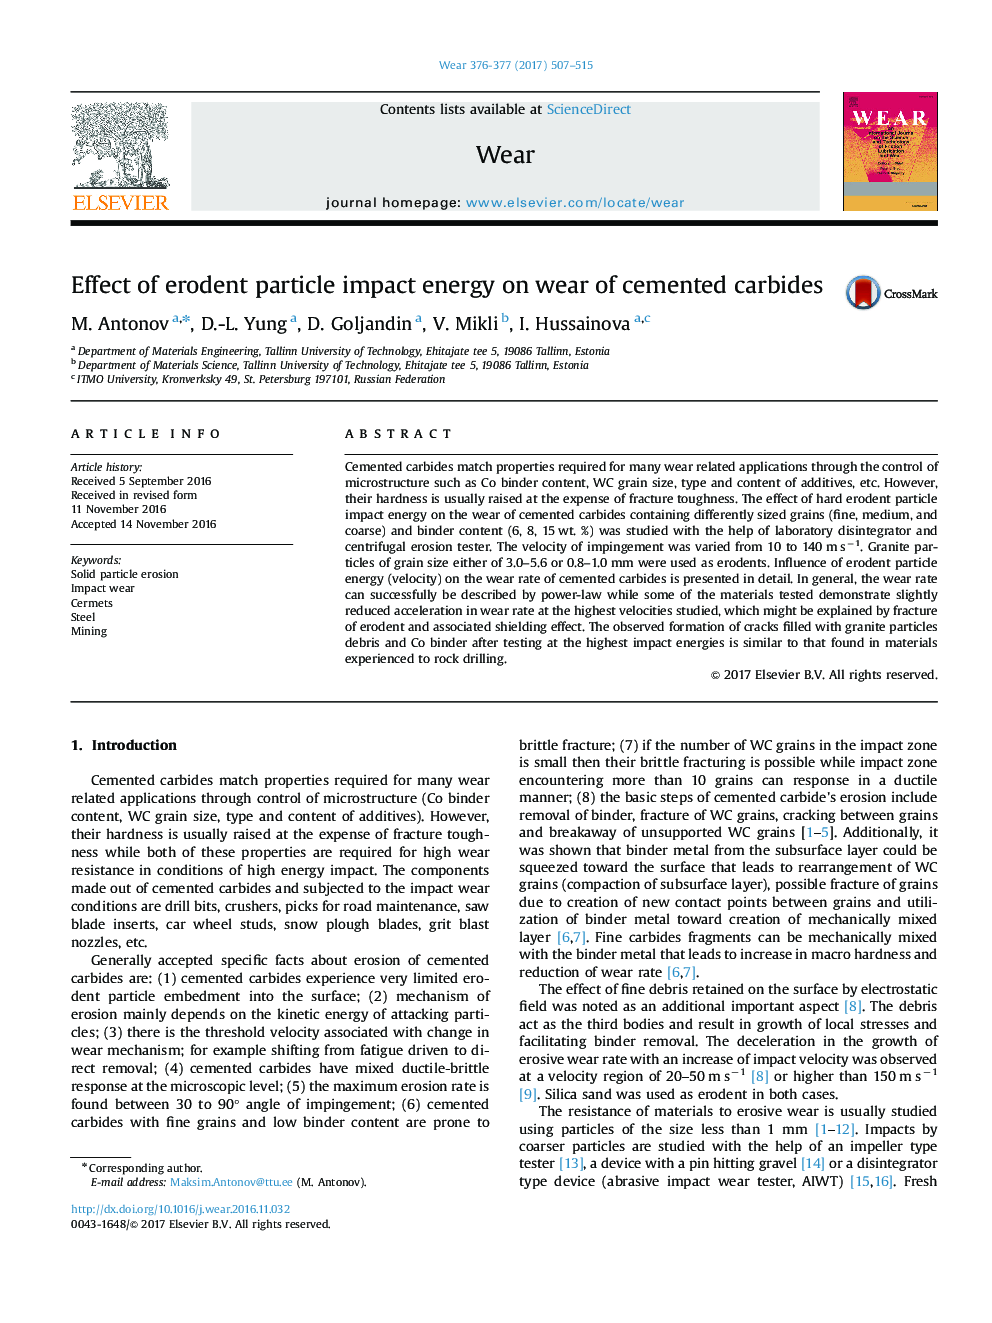 Effect of erodent particle impact energy on wear of cemented carbides